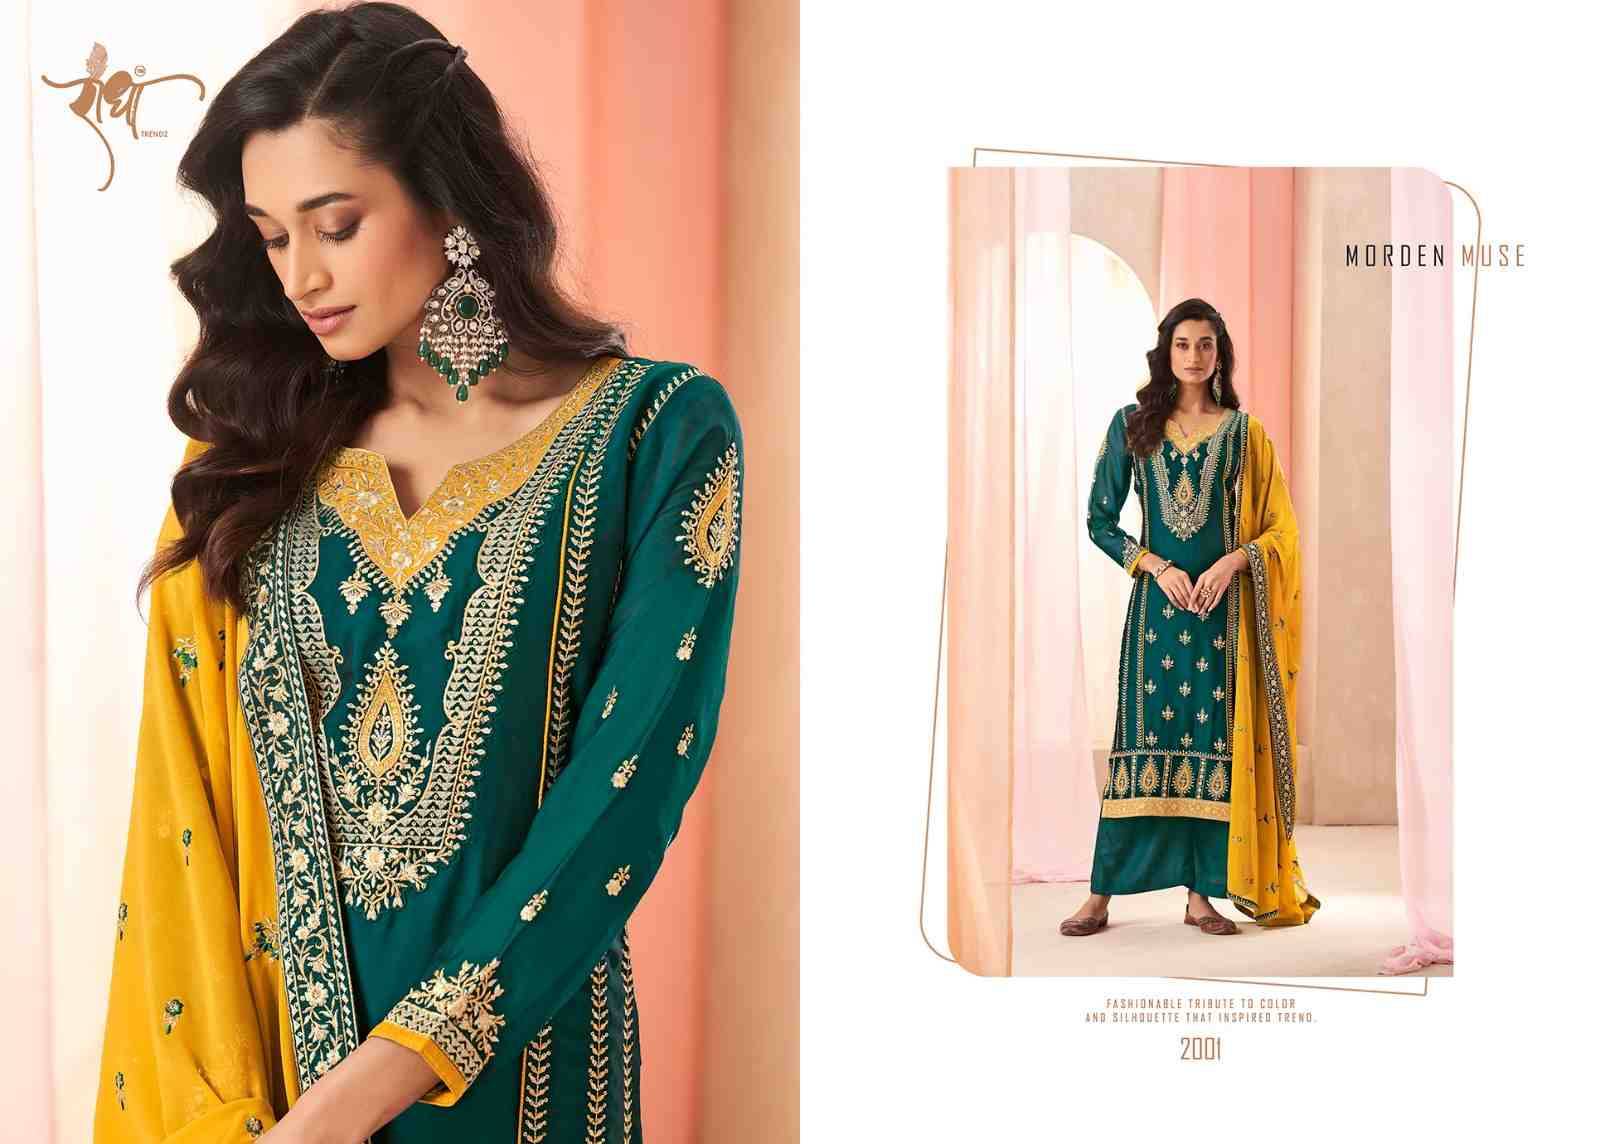 Satrangi By Radha Trends 2001 To 2002 Series Beautiful Festive Suits Colorful Stylish Fancy Casual Wear & Ethnic Wear Premium Silk Embroidered Dresses At Wholesale Price